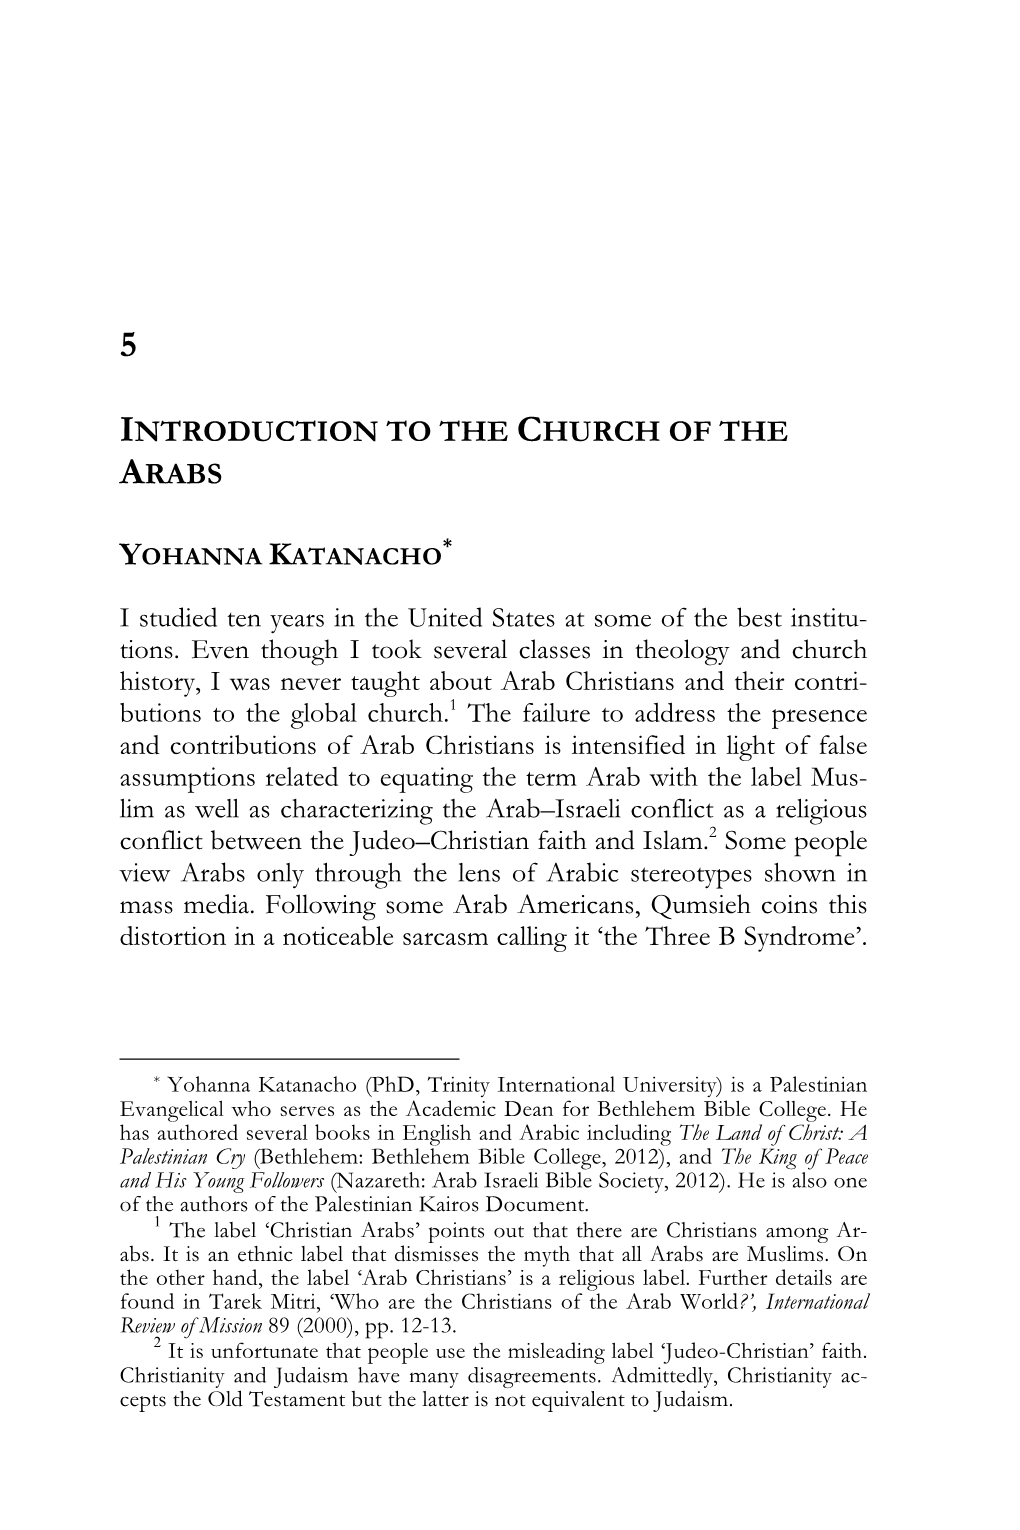 Introduction to the Church of the Arabs